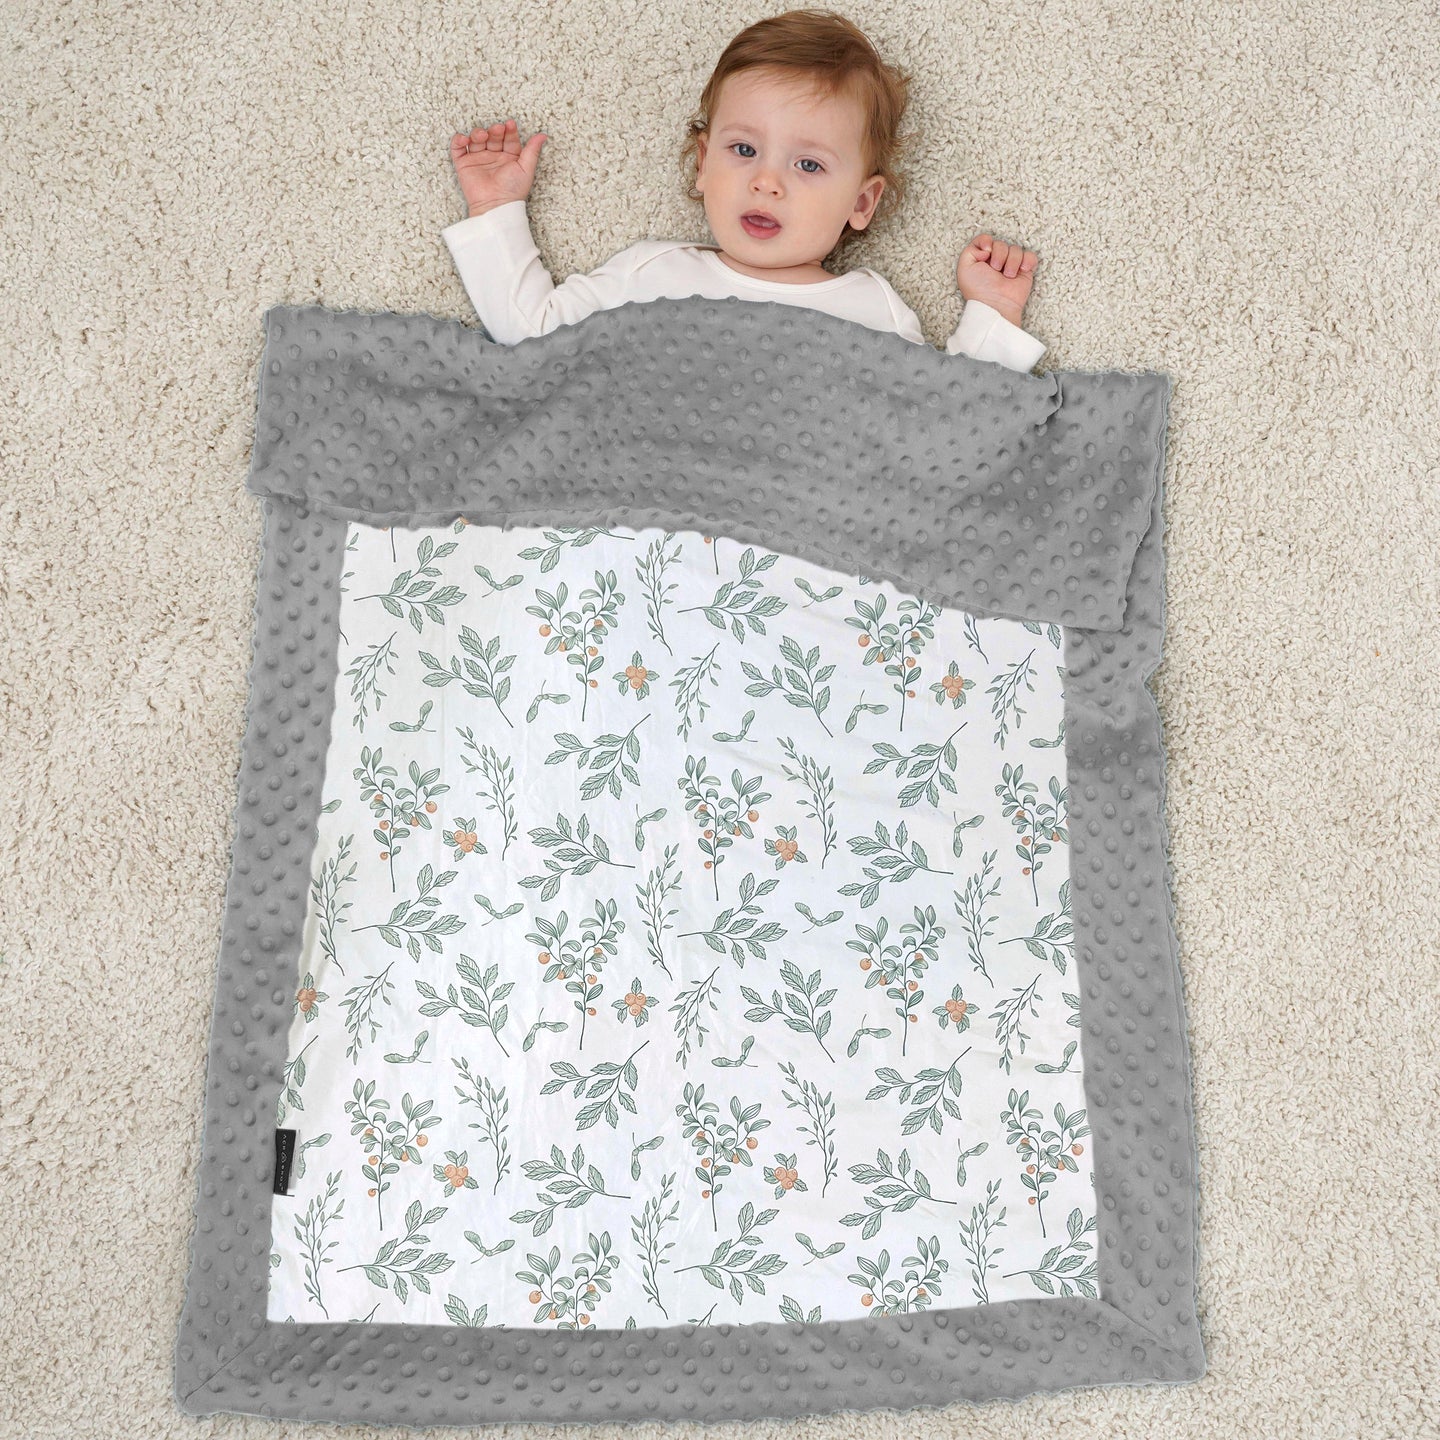 ACRABROS Baby Blankets Double Layer Dotted Backing 30X40 Inches,Linear Floral